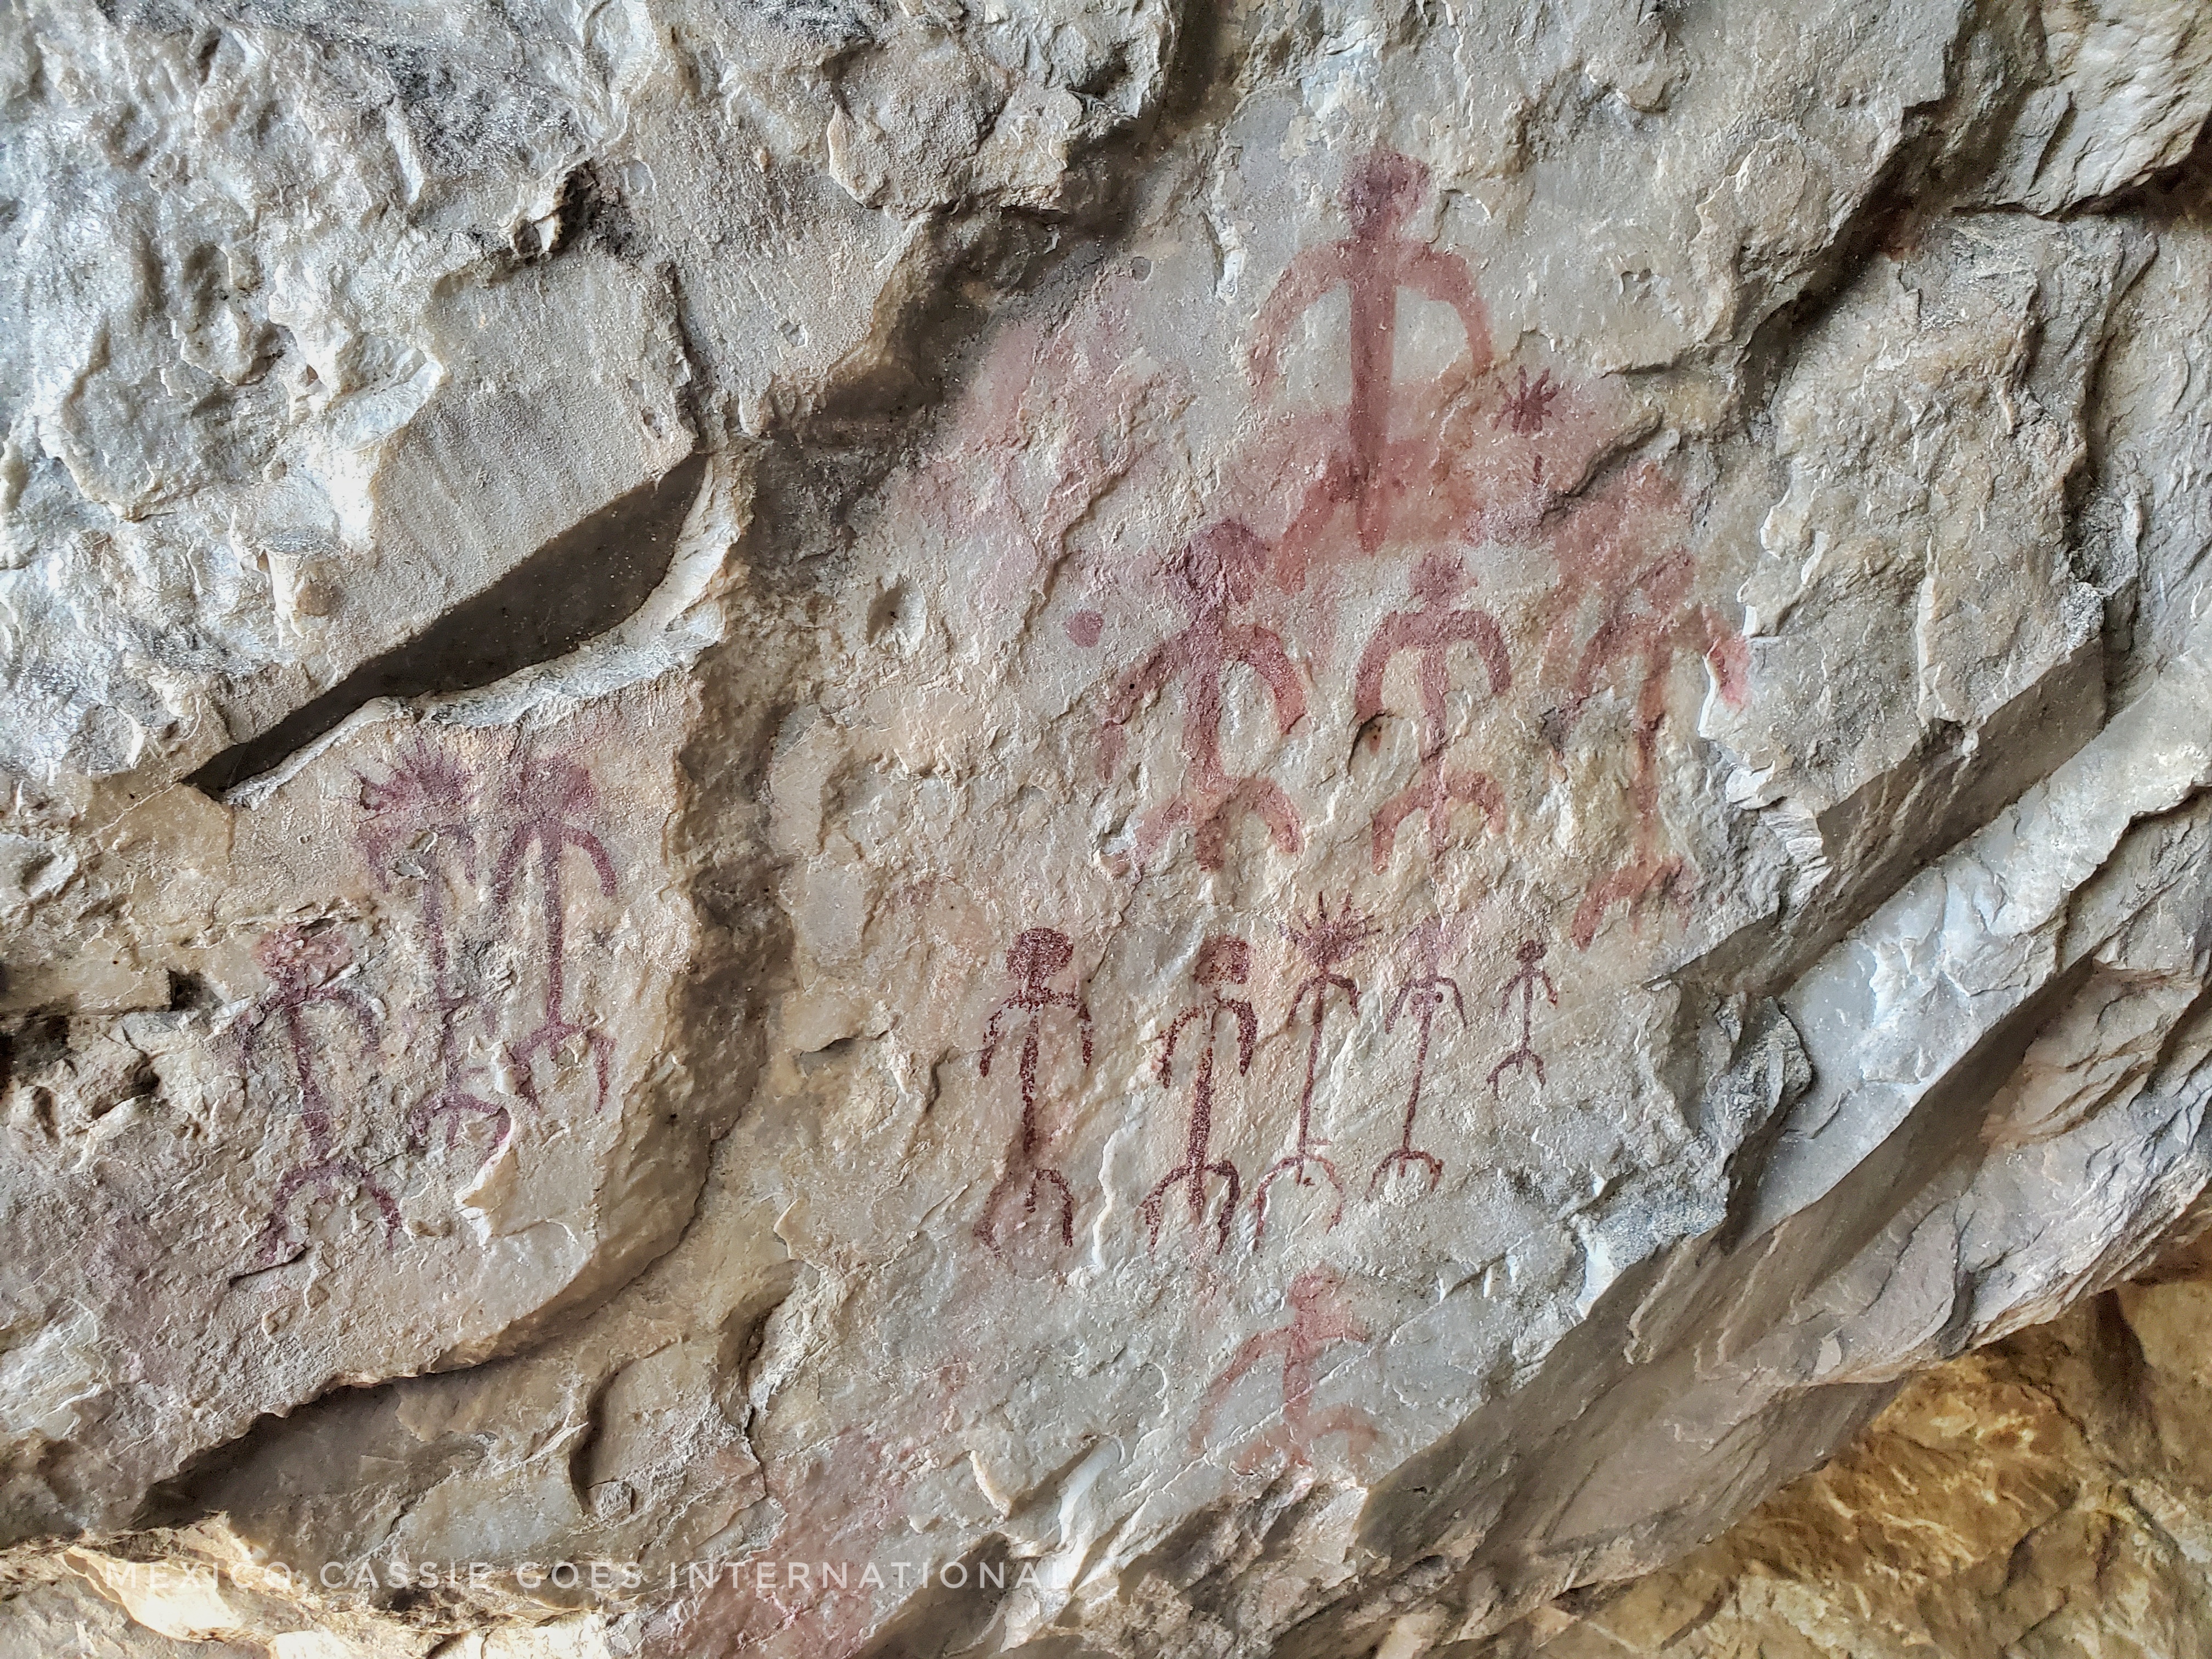 rock art: ancient paintings of figures painted in red on rock